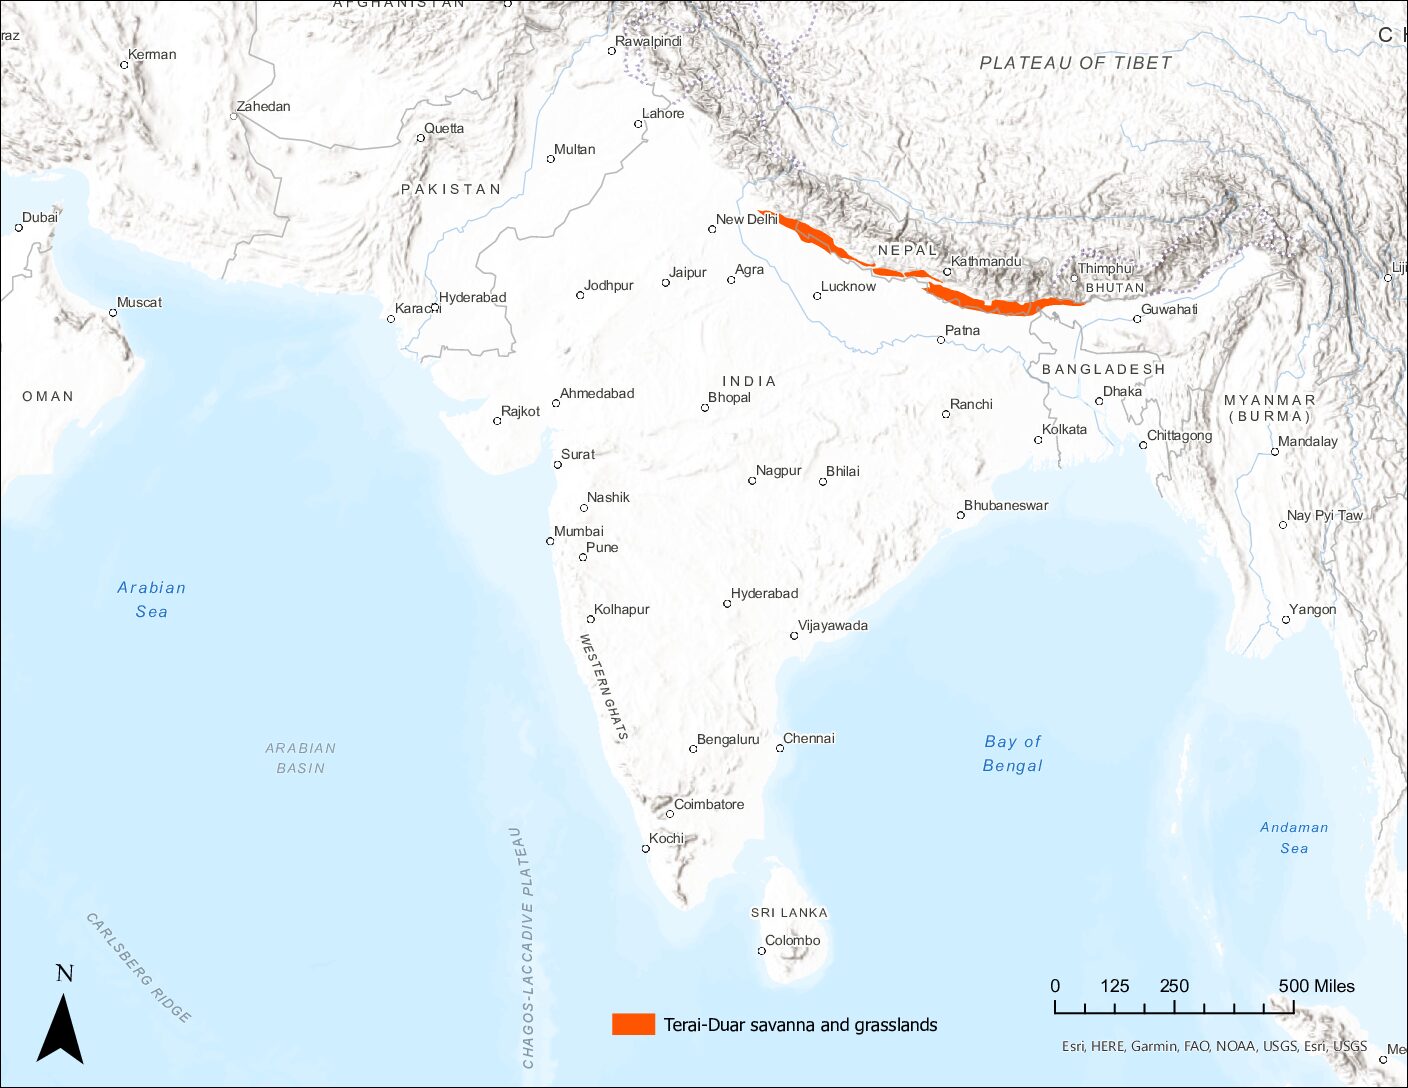 Map of the sub-himalayan grasslands of India. The map shows the Terai-Duar savanna and grasslands region, which is shaded orange. The region is a think strip of land that occurs just south of the Himalayan Mountains.